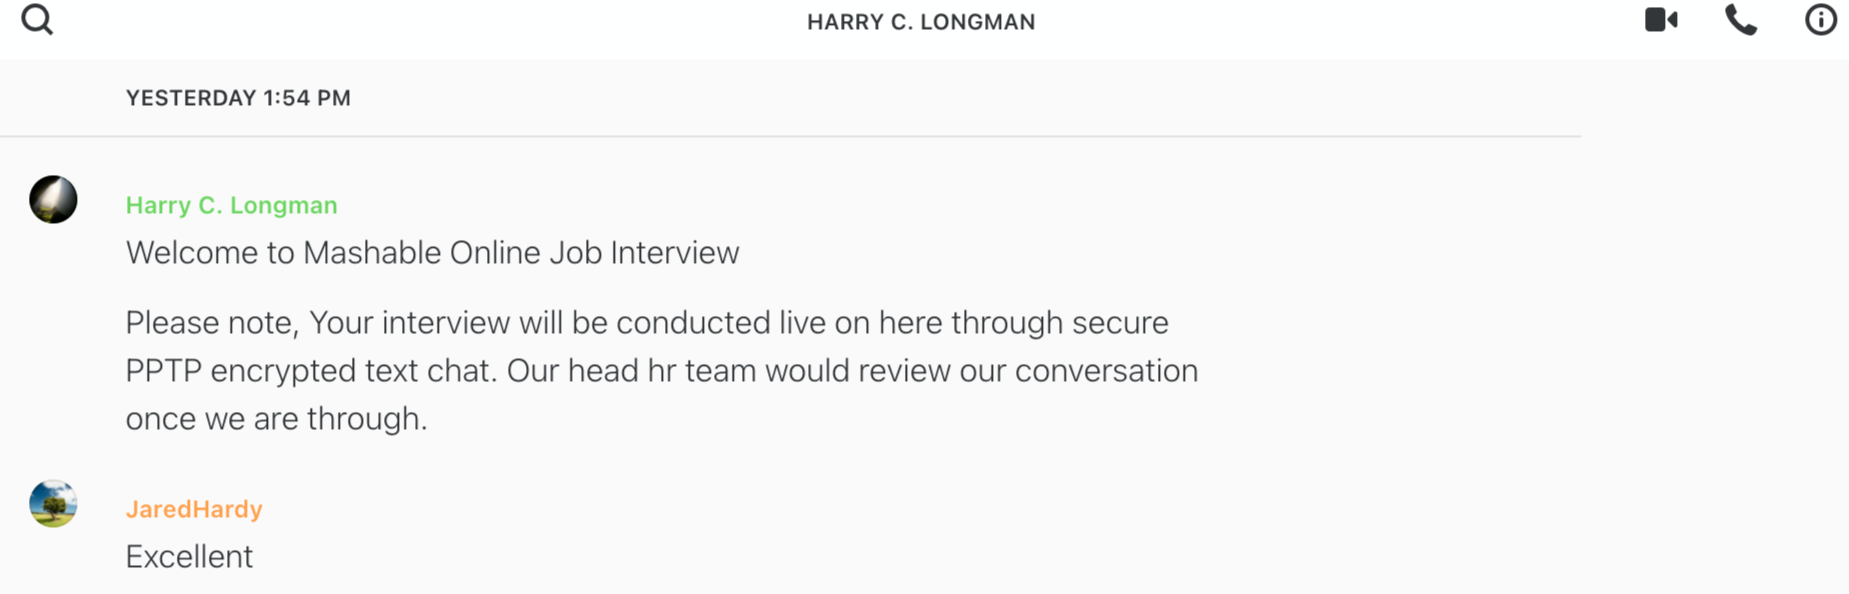 Harry C. Longman went through a full interview with me.